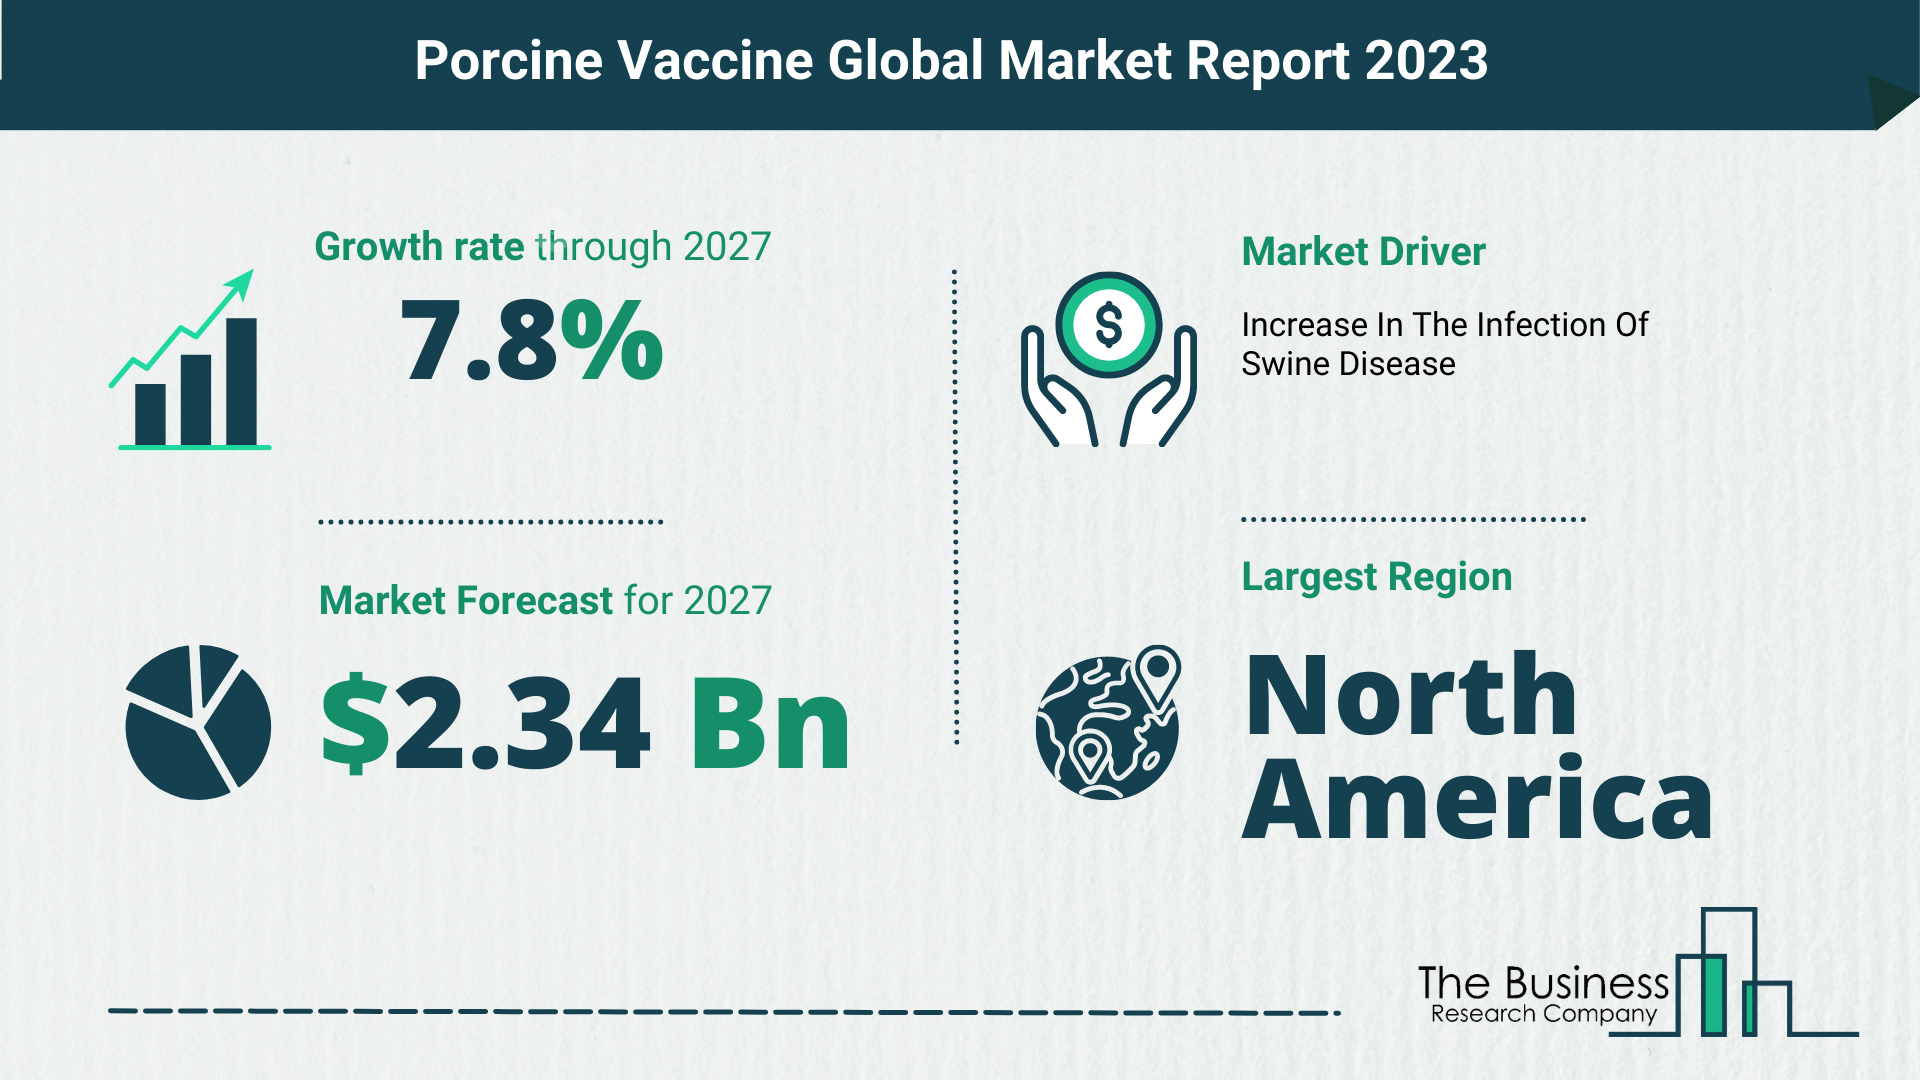 Porcine Vaccine Market Size, Share, And Growth Rate Analysis 2023